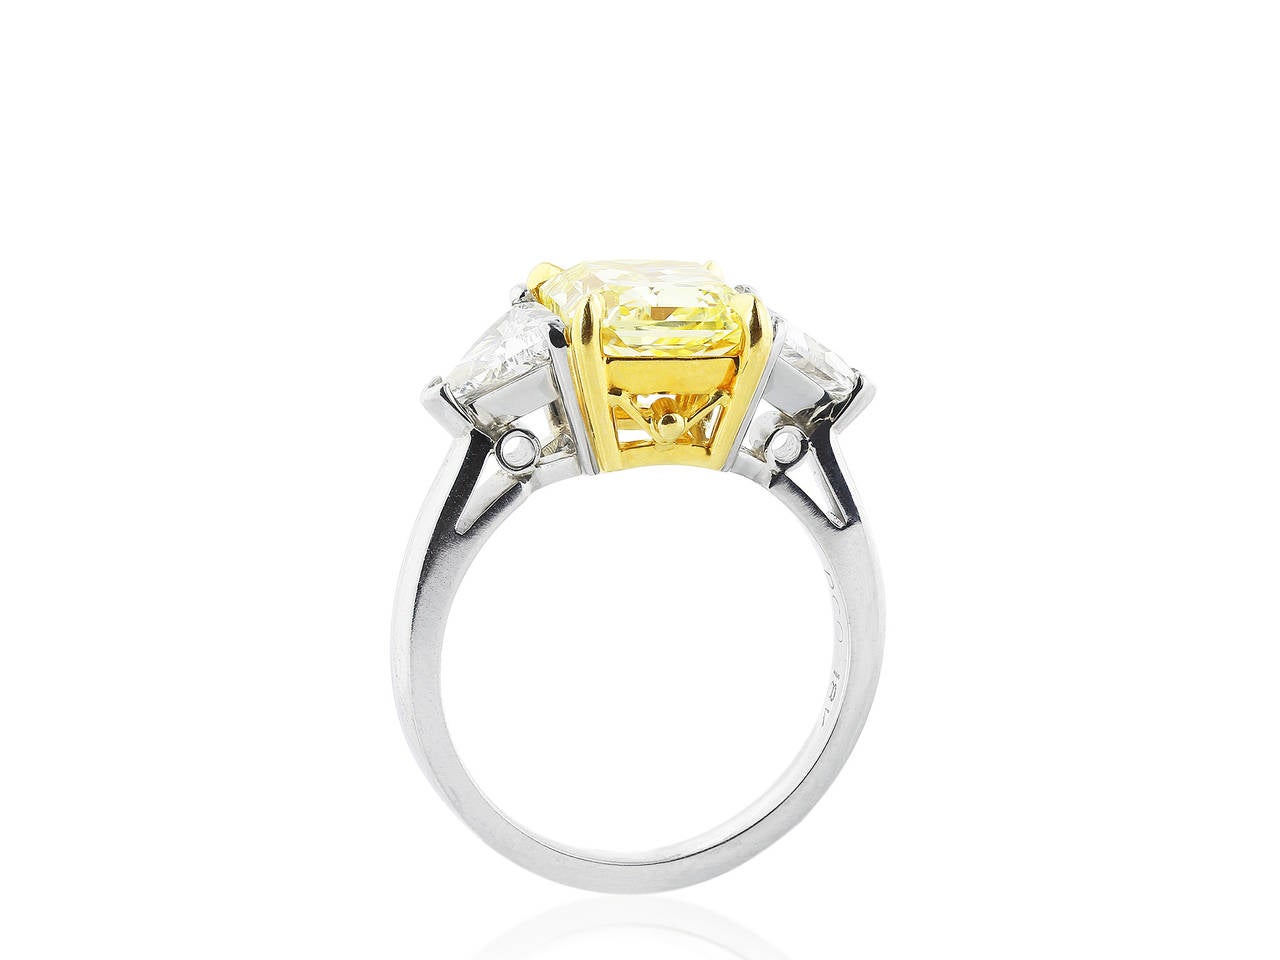 Contemporary 3.01 Carat Radiant Fancy Yellow Diamond Ring For Sale